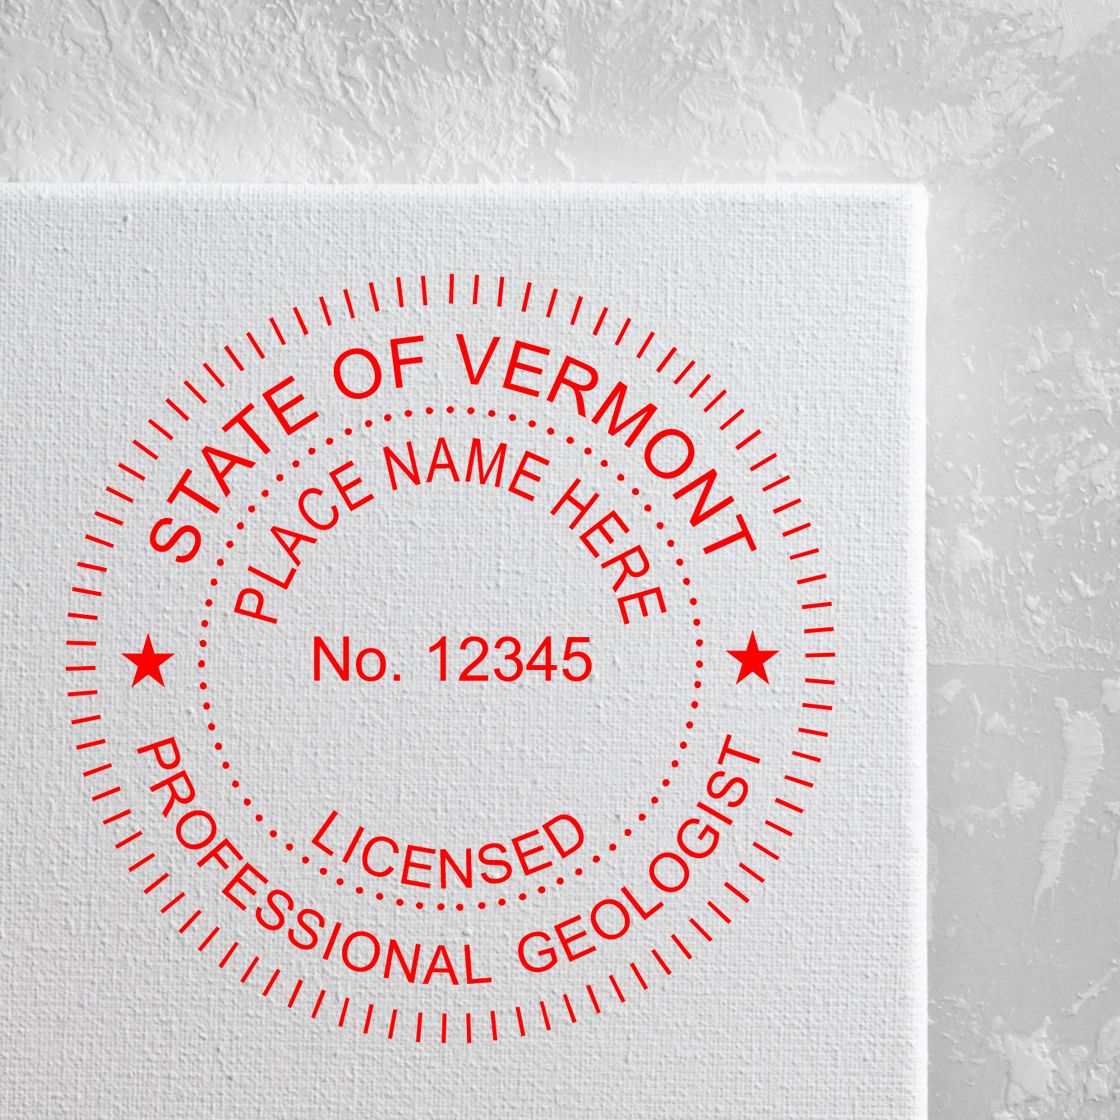 Another Example of a stamped impression of the Self-Inking Vermont Geologist Stamp on a office form